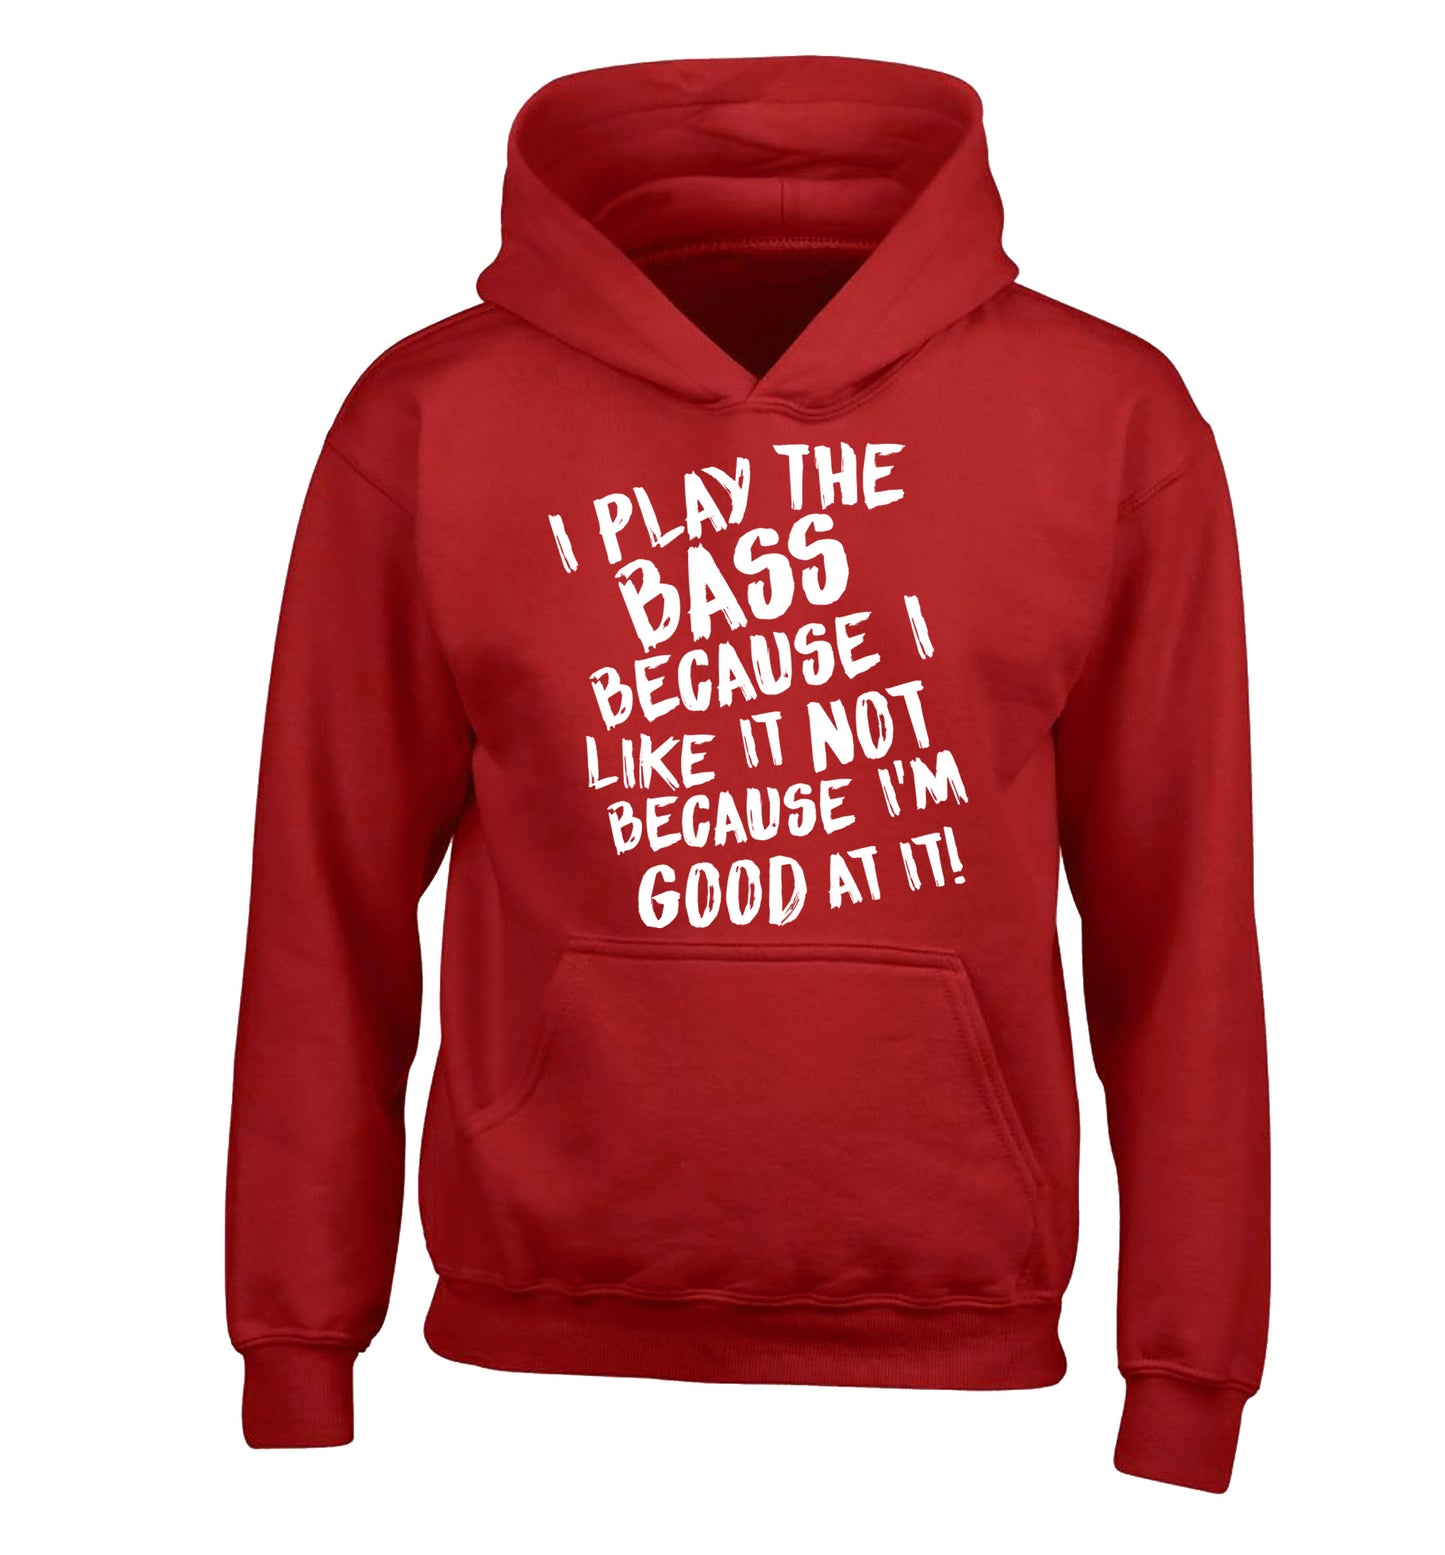 I play the bass because I like it not because I'm good at it children's red hoodie 12-14 Years